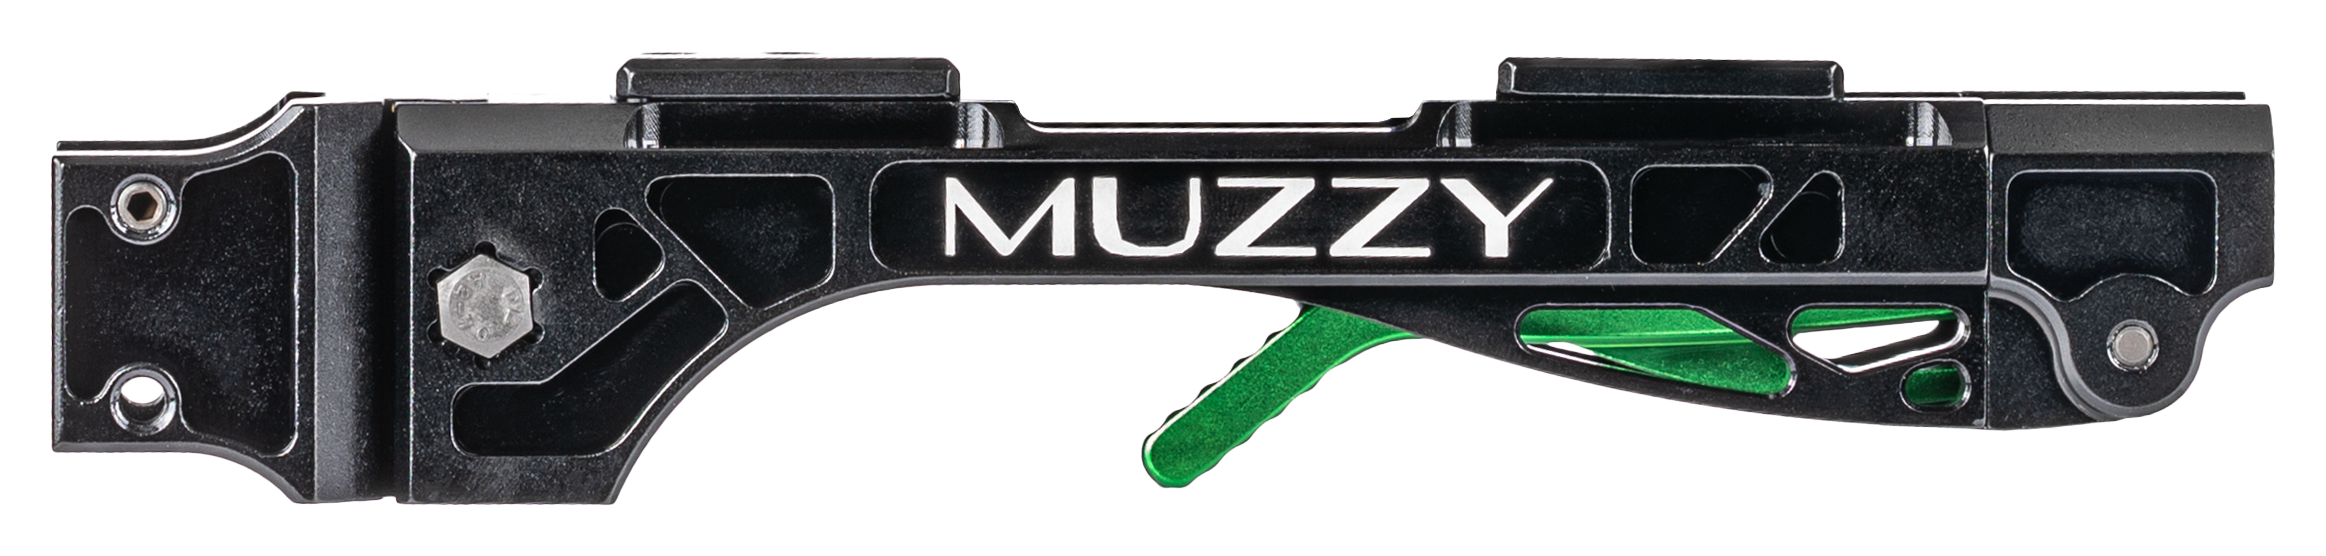 Muzzy Bowfishing LV-R Reel Seat Black And Green - Mike's Archery